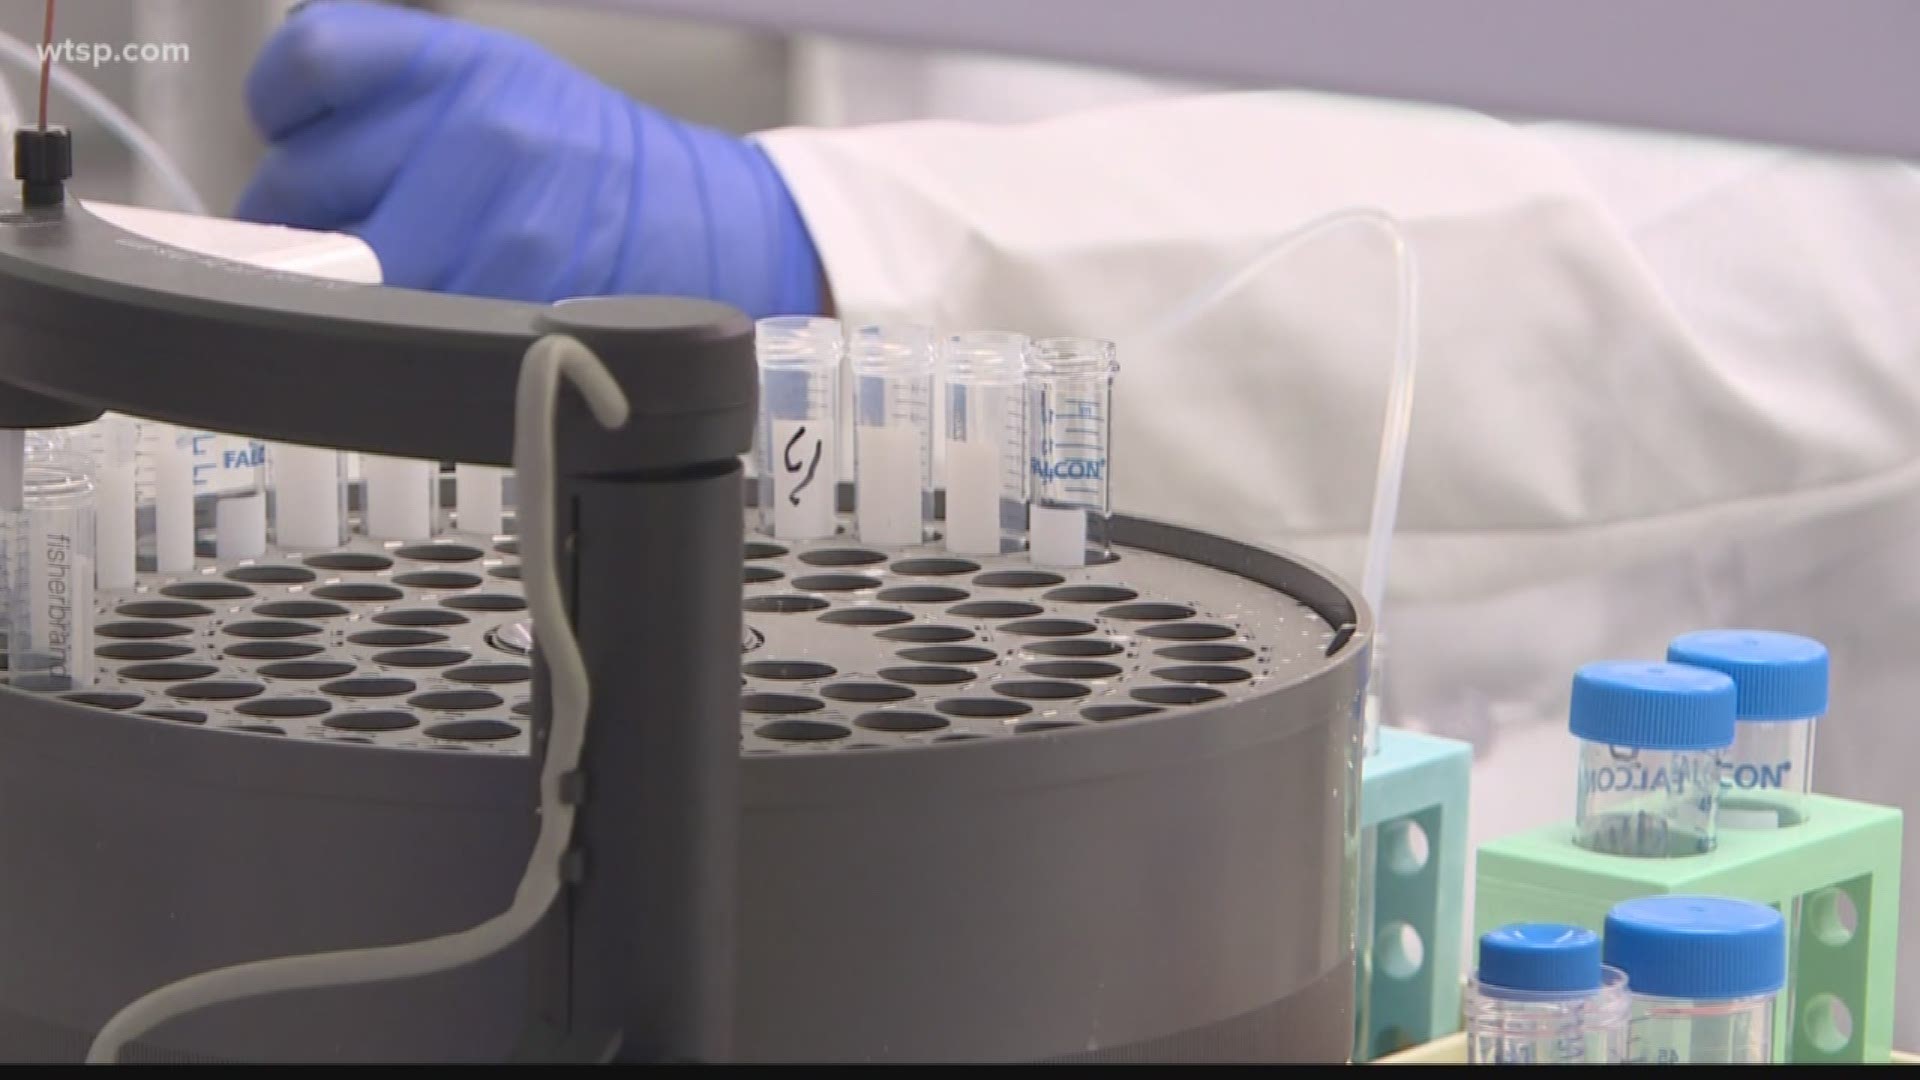 A Tampa-based company has developed a cancer vaccine that's already being tested in humans.

Morphogenesis, Inc. believes it can use the body's own immune system to fight the disease.